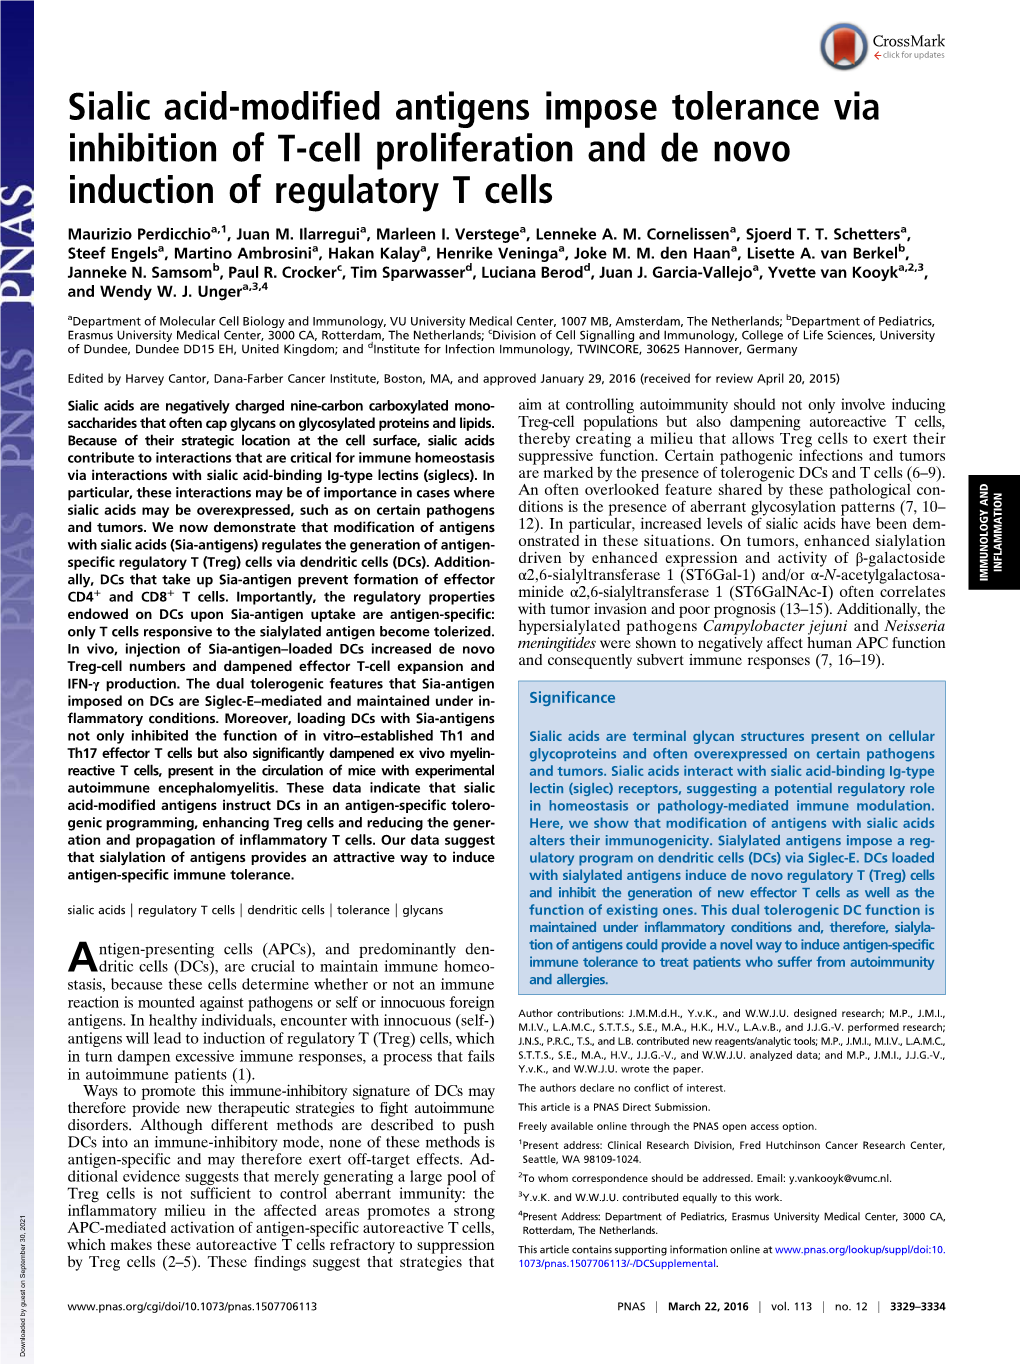 Sialic Acid-Modified Antigens Impose Tolerance Via Inhibition of T-Cell Proliferation and De Novo Induction of Regulatory T Cells